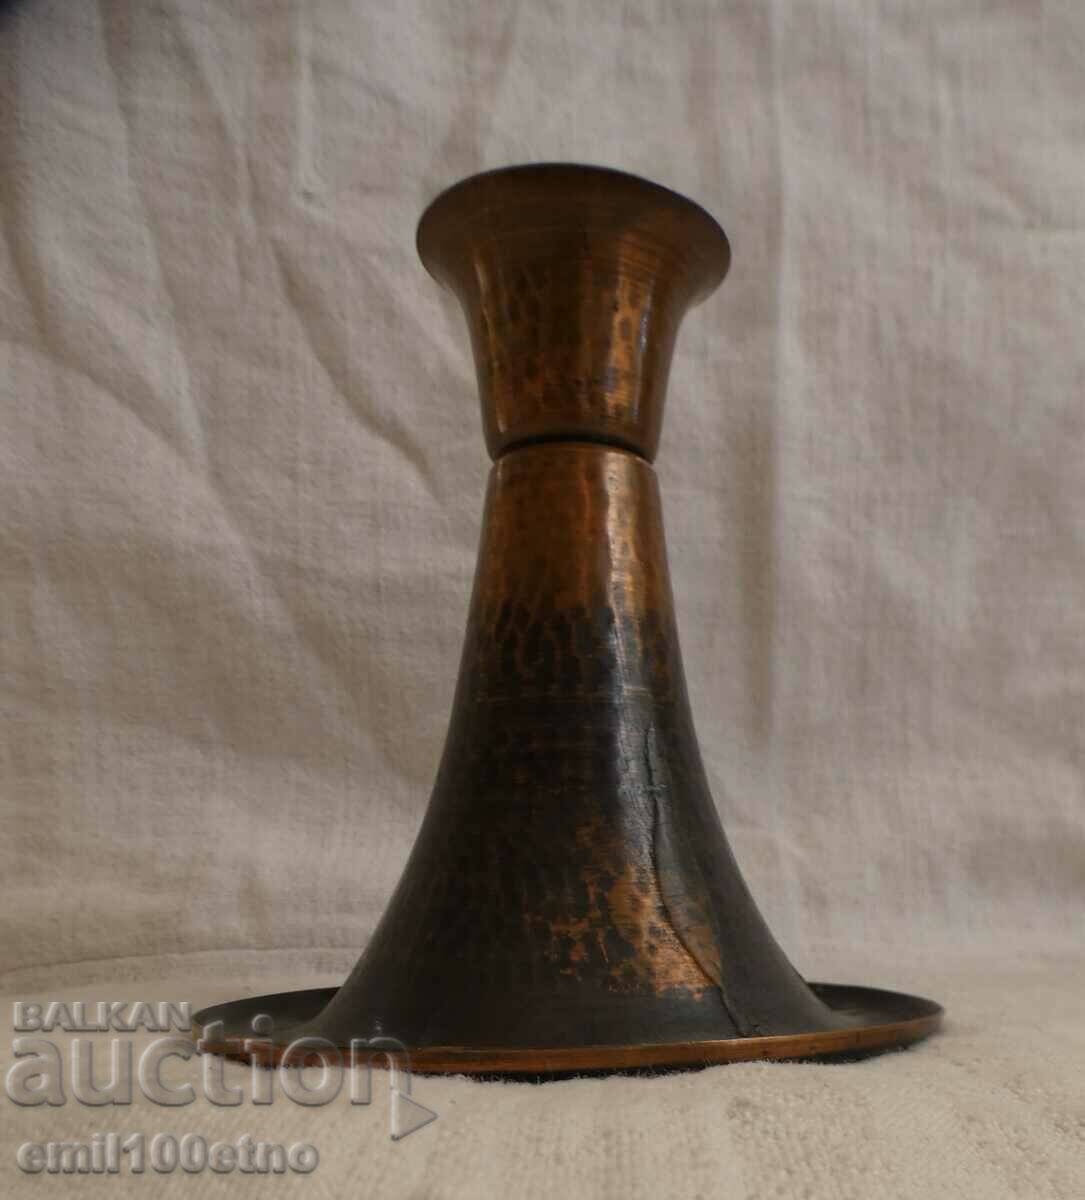 An old copper candleholder